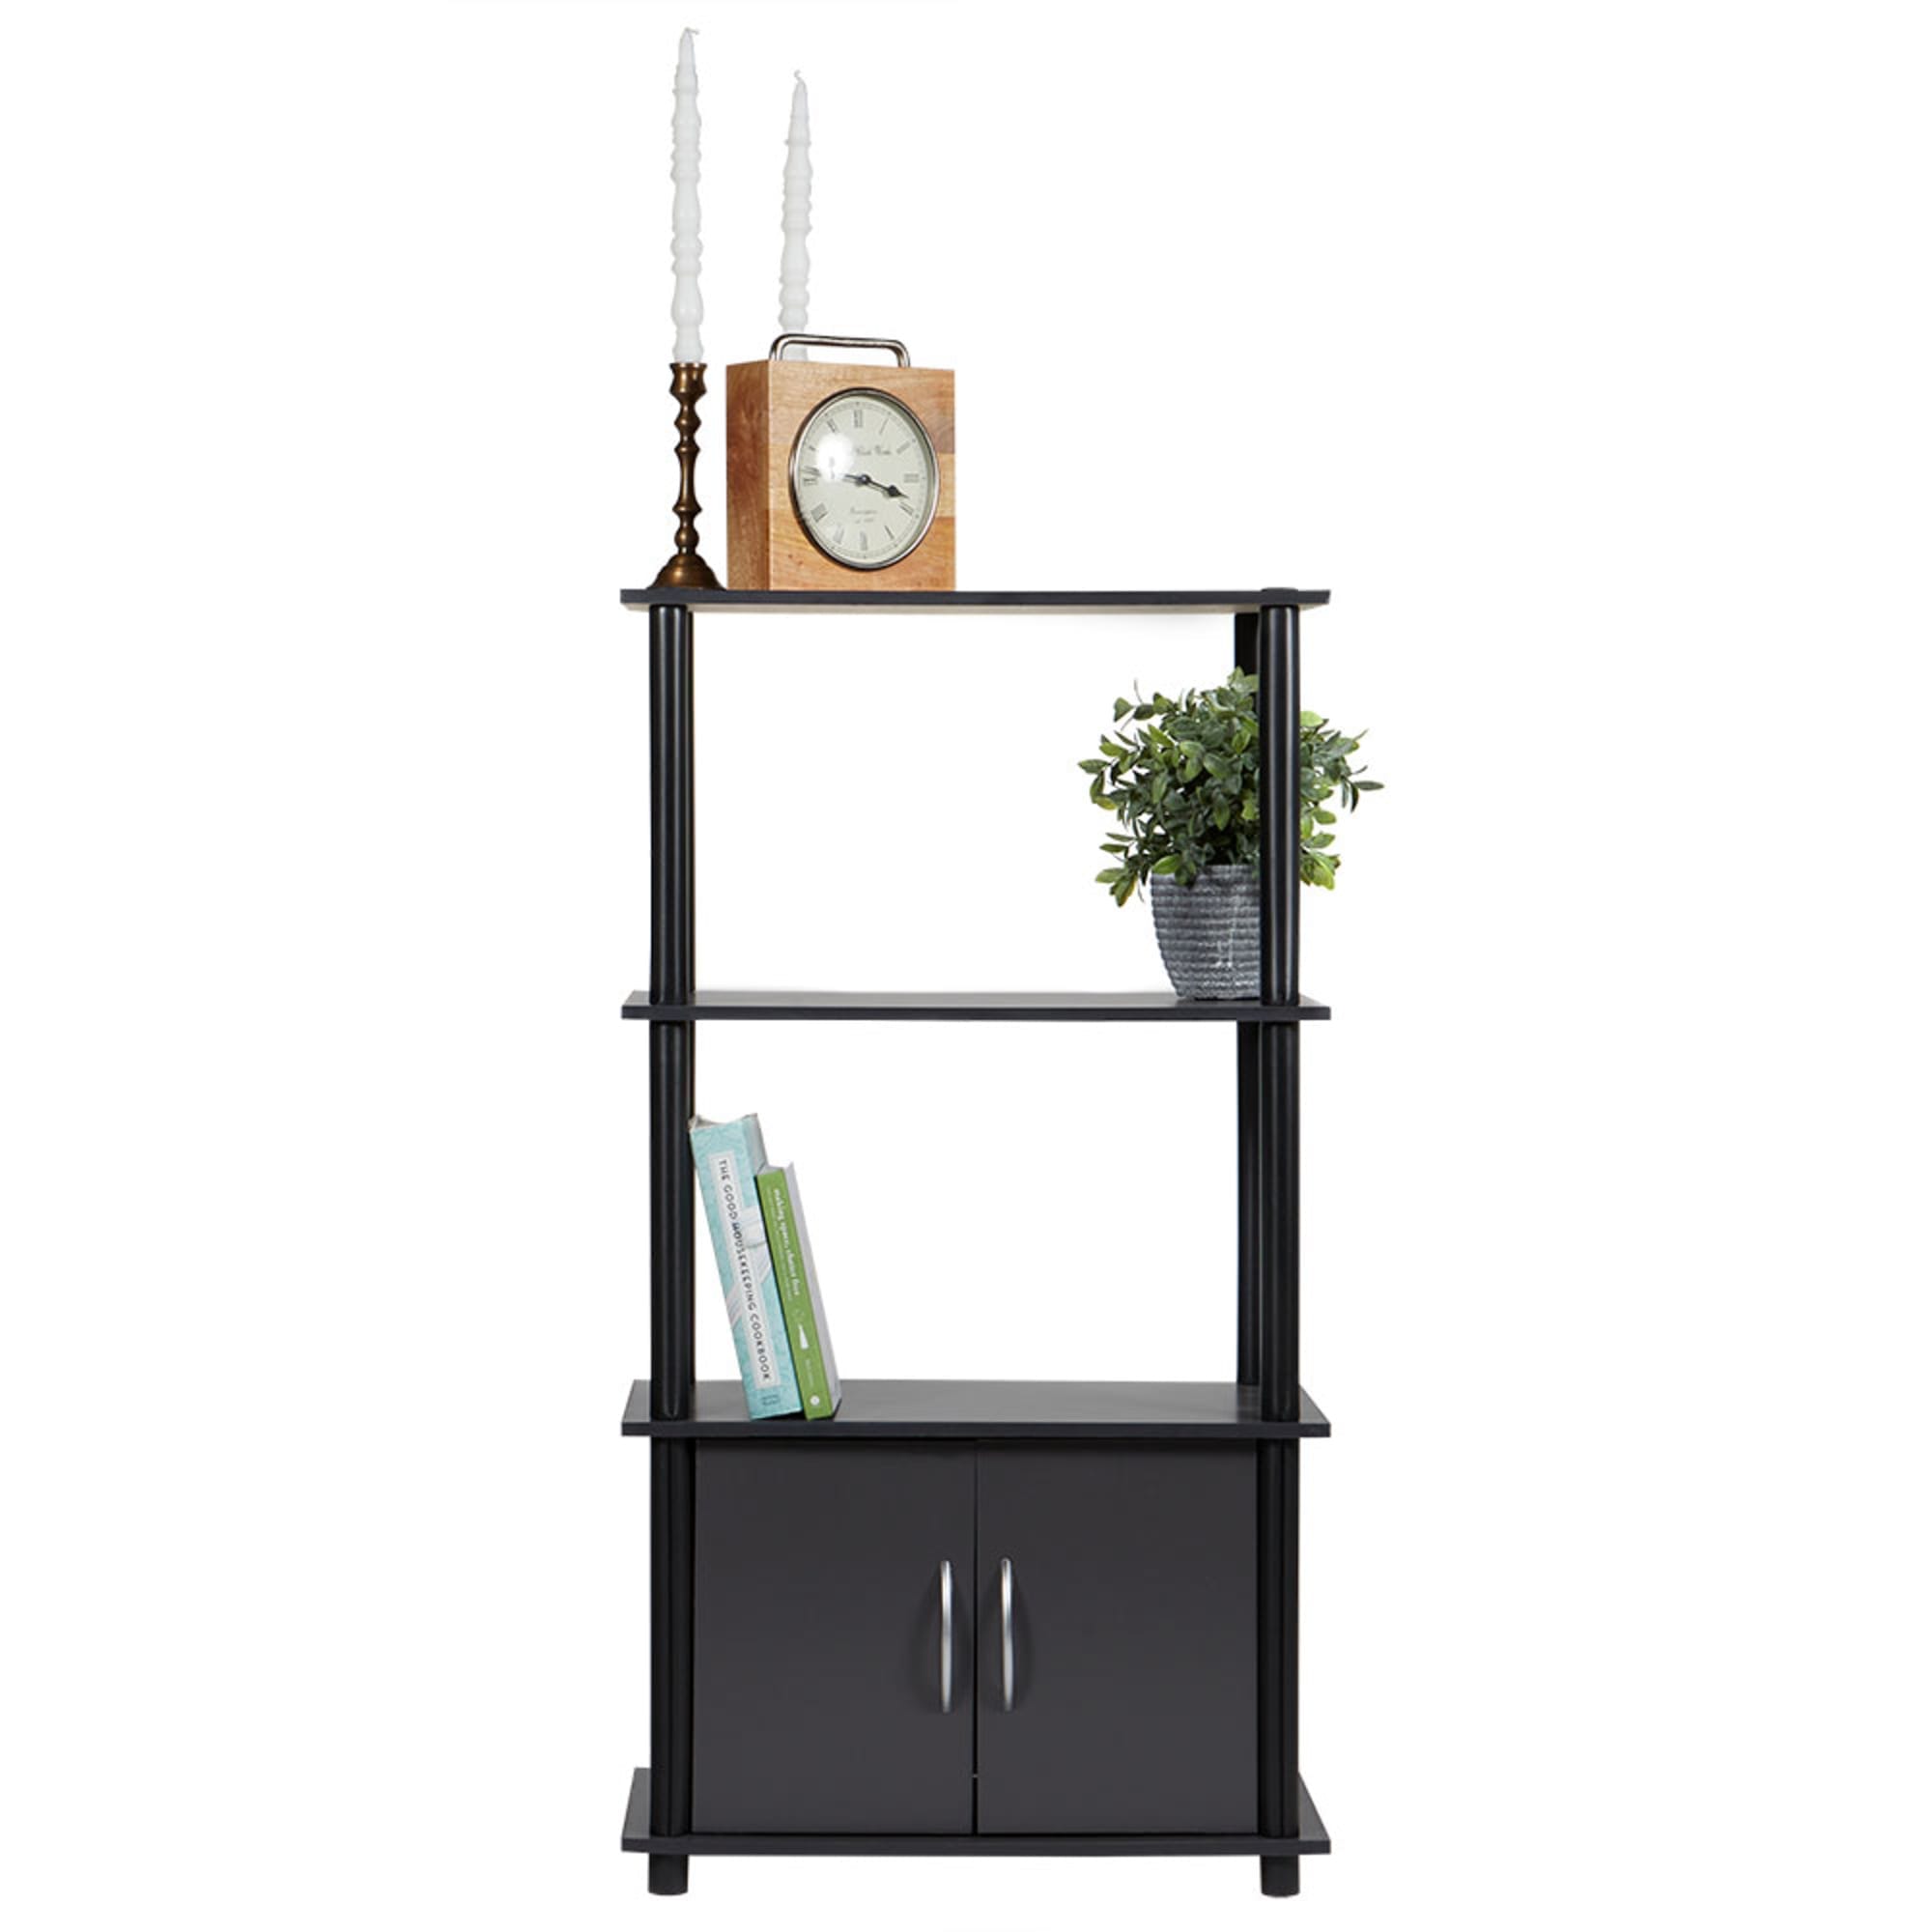 Home Basics 4 Tier Storage Shelf with Cabinet, Grey
 $40.00 EACH, CASE PACK OF 1